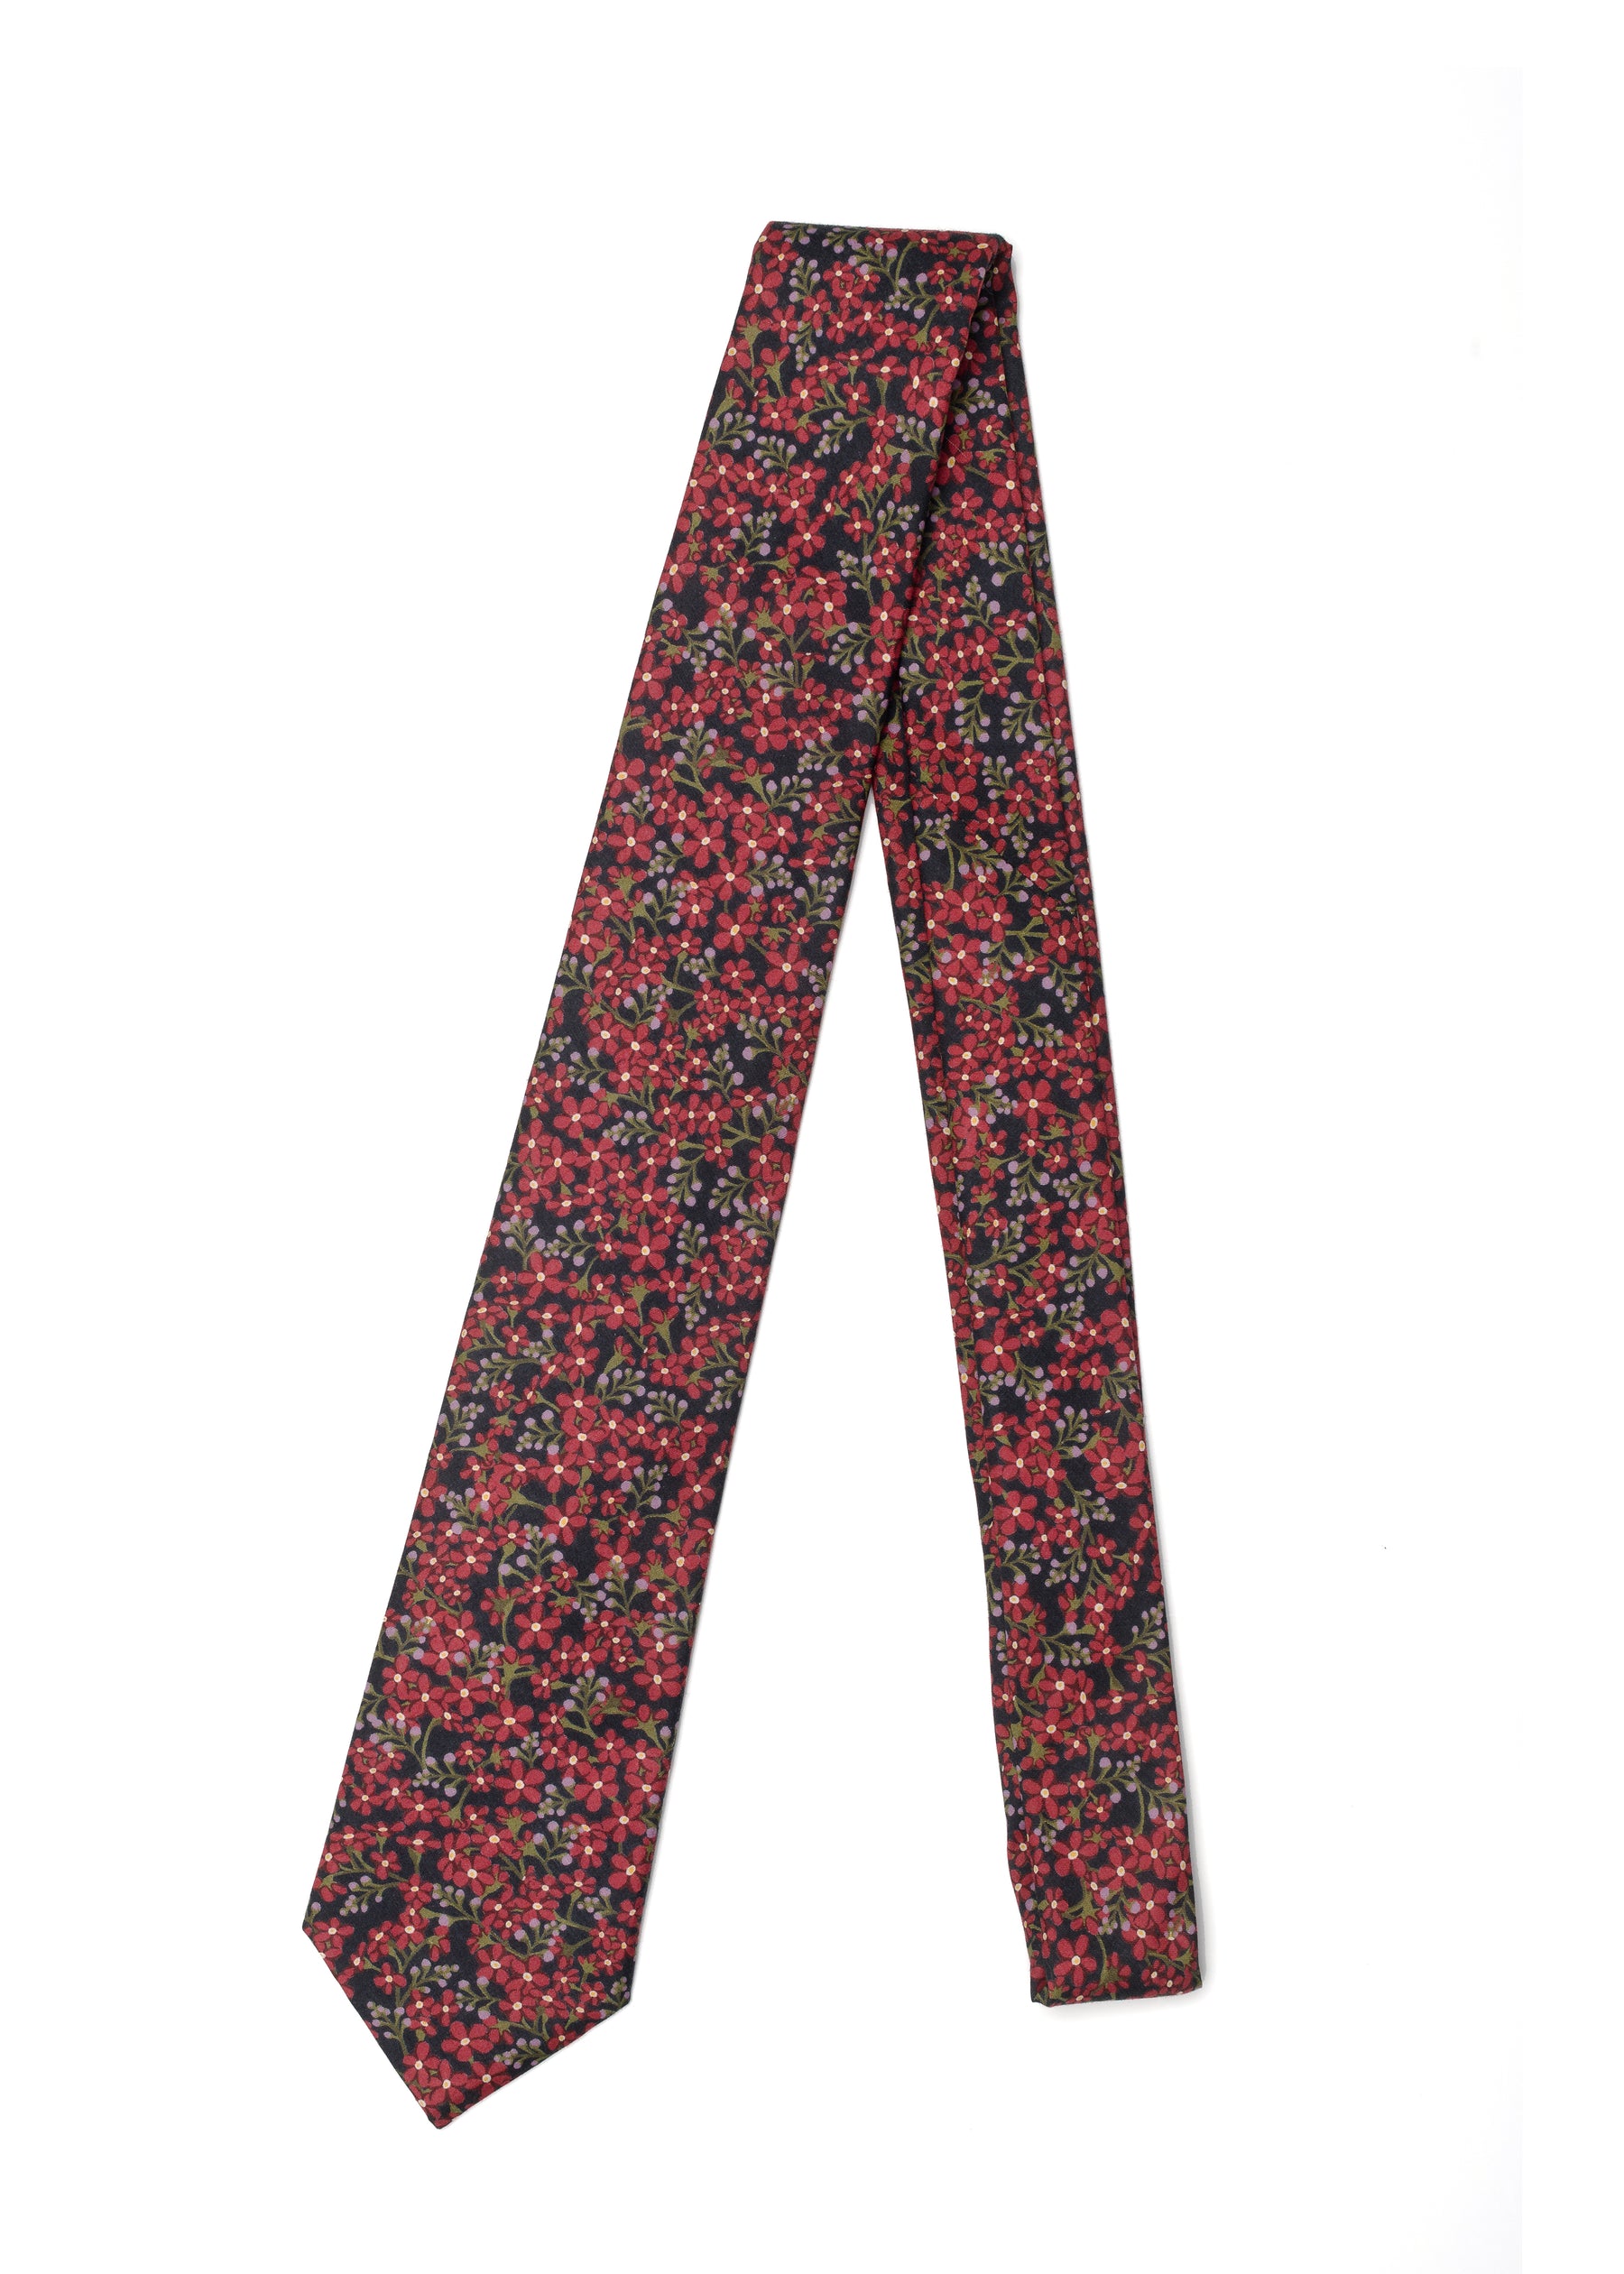 LIBERTY OF LONDON Star Anise TIE